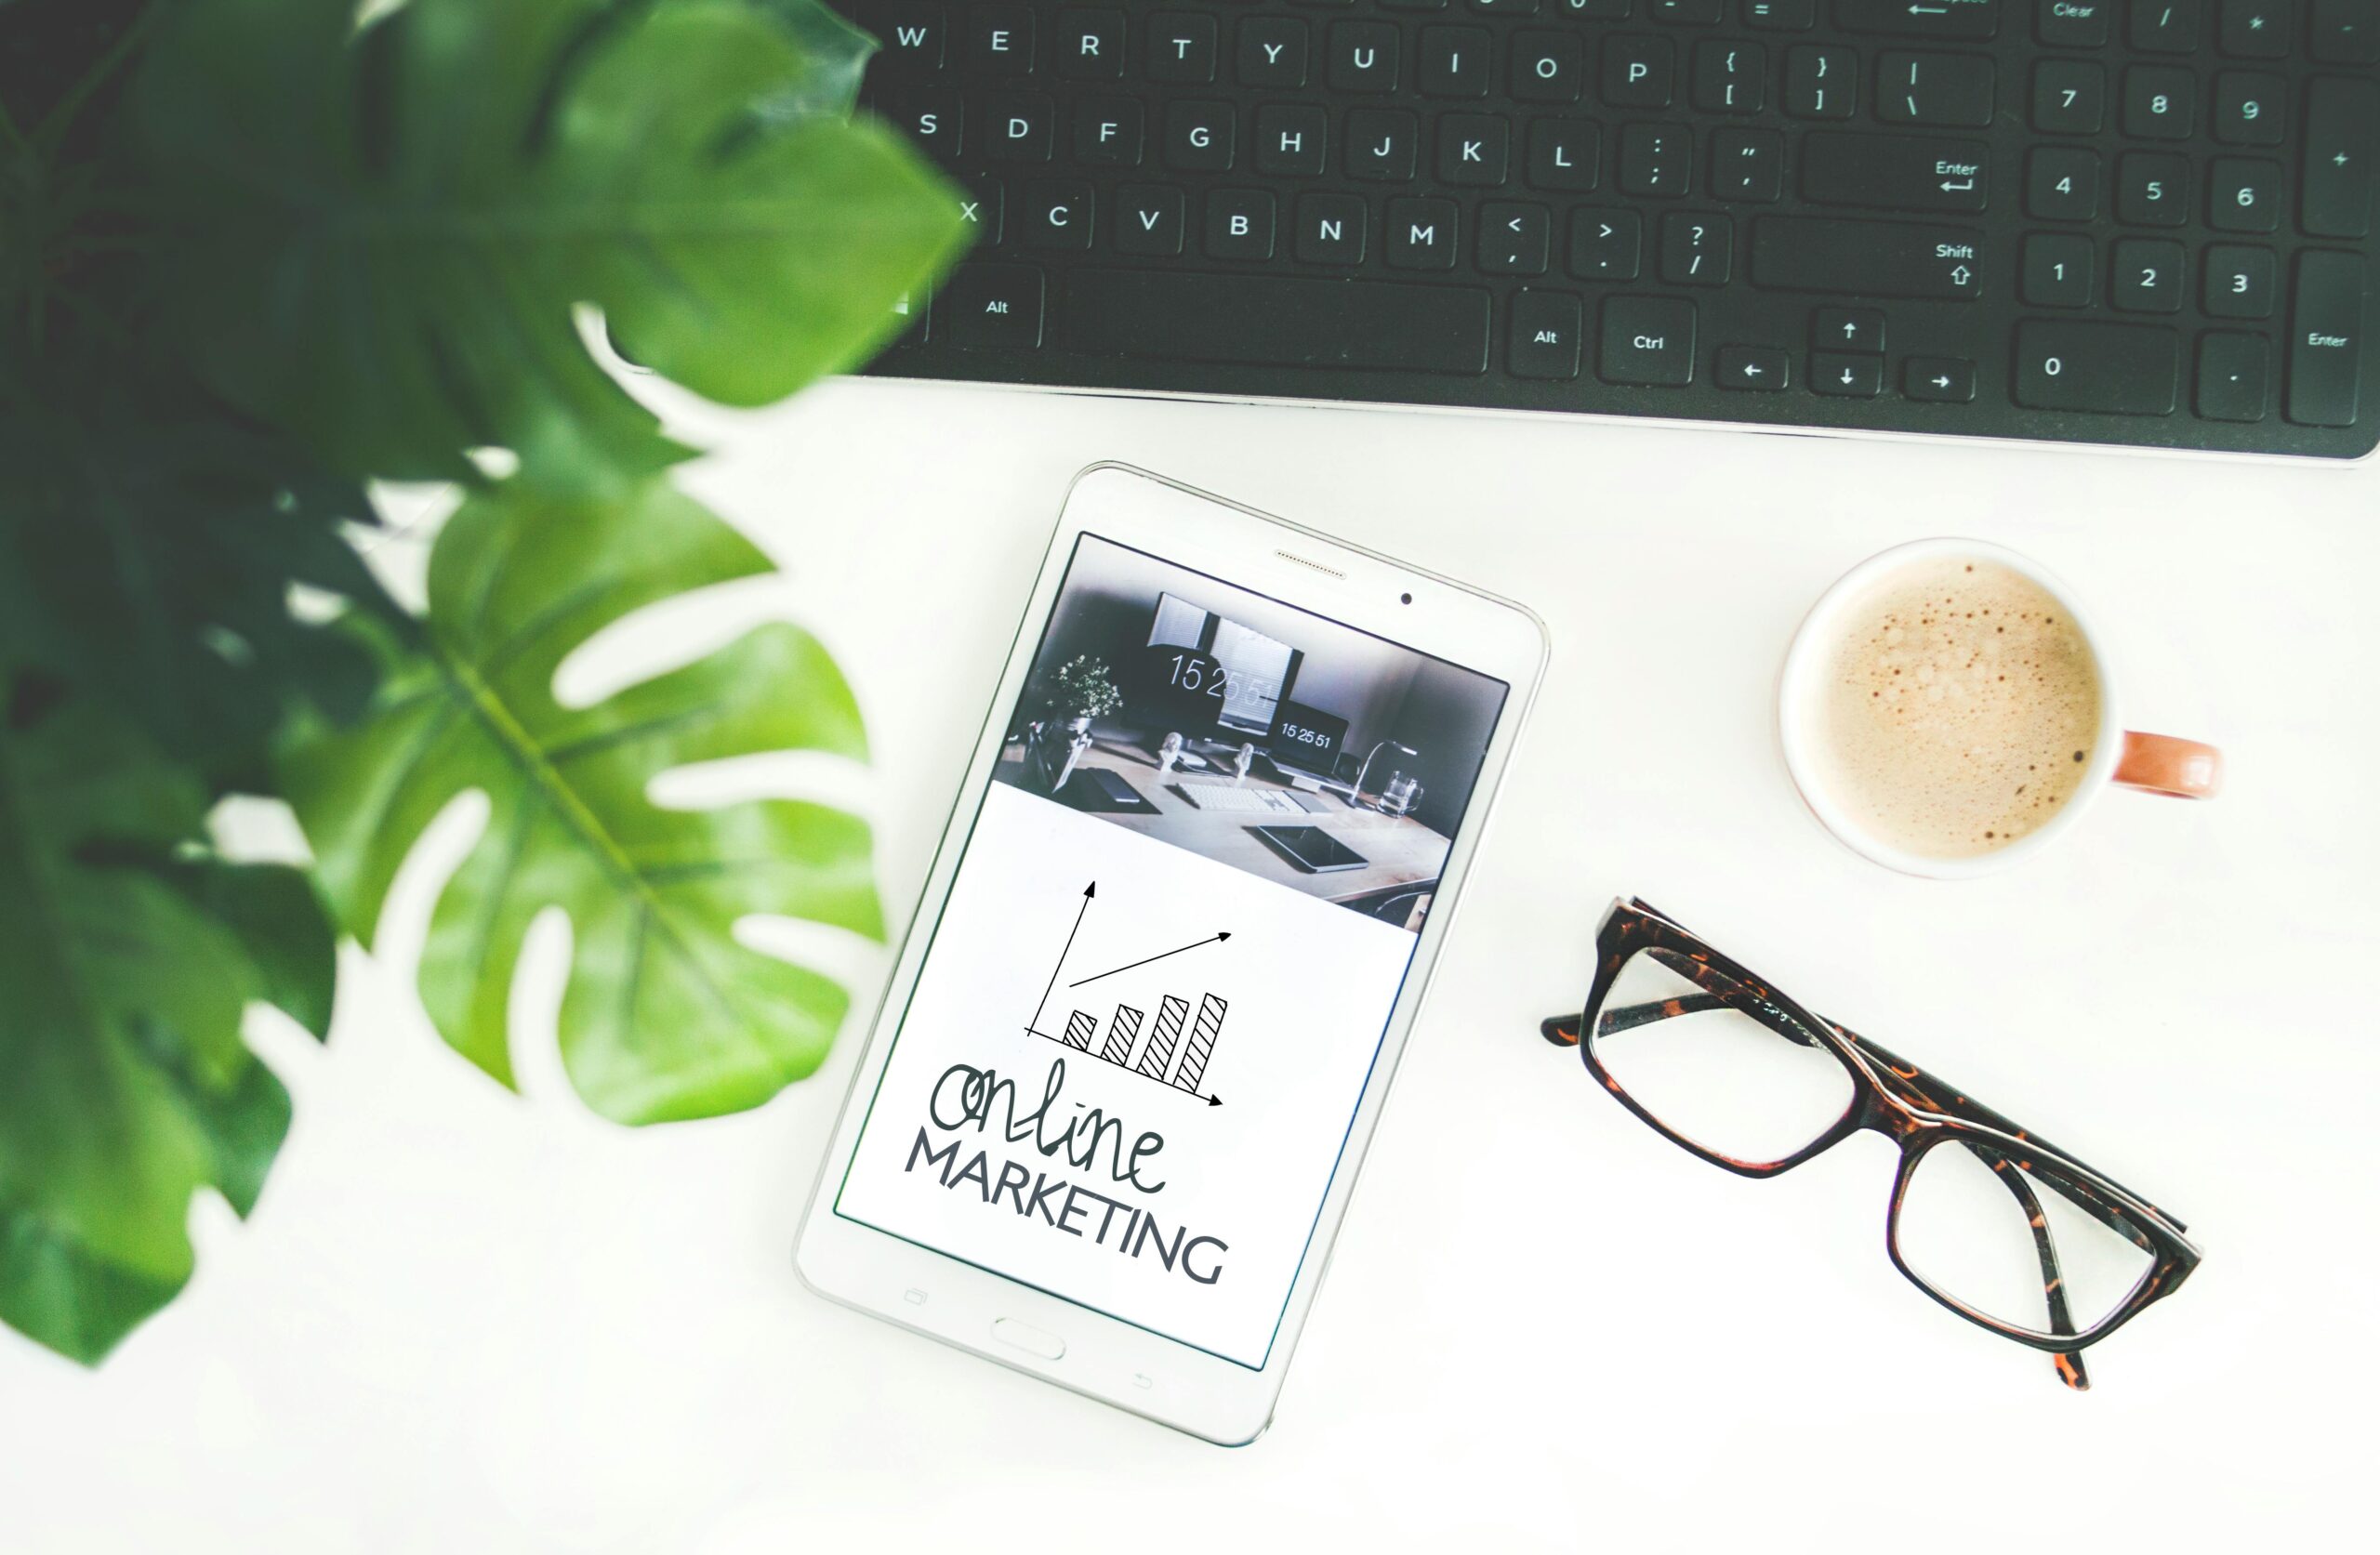 Digital marketing strategy for small business growth by Silesky Marketing